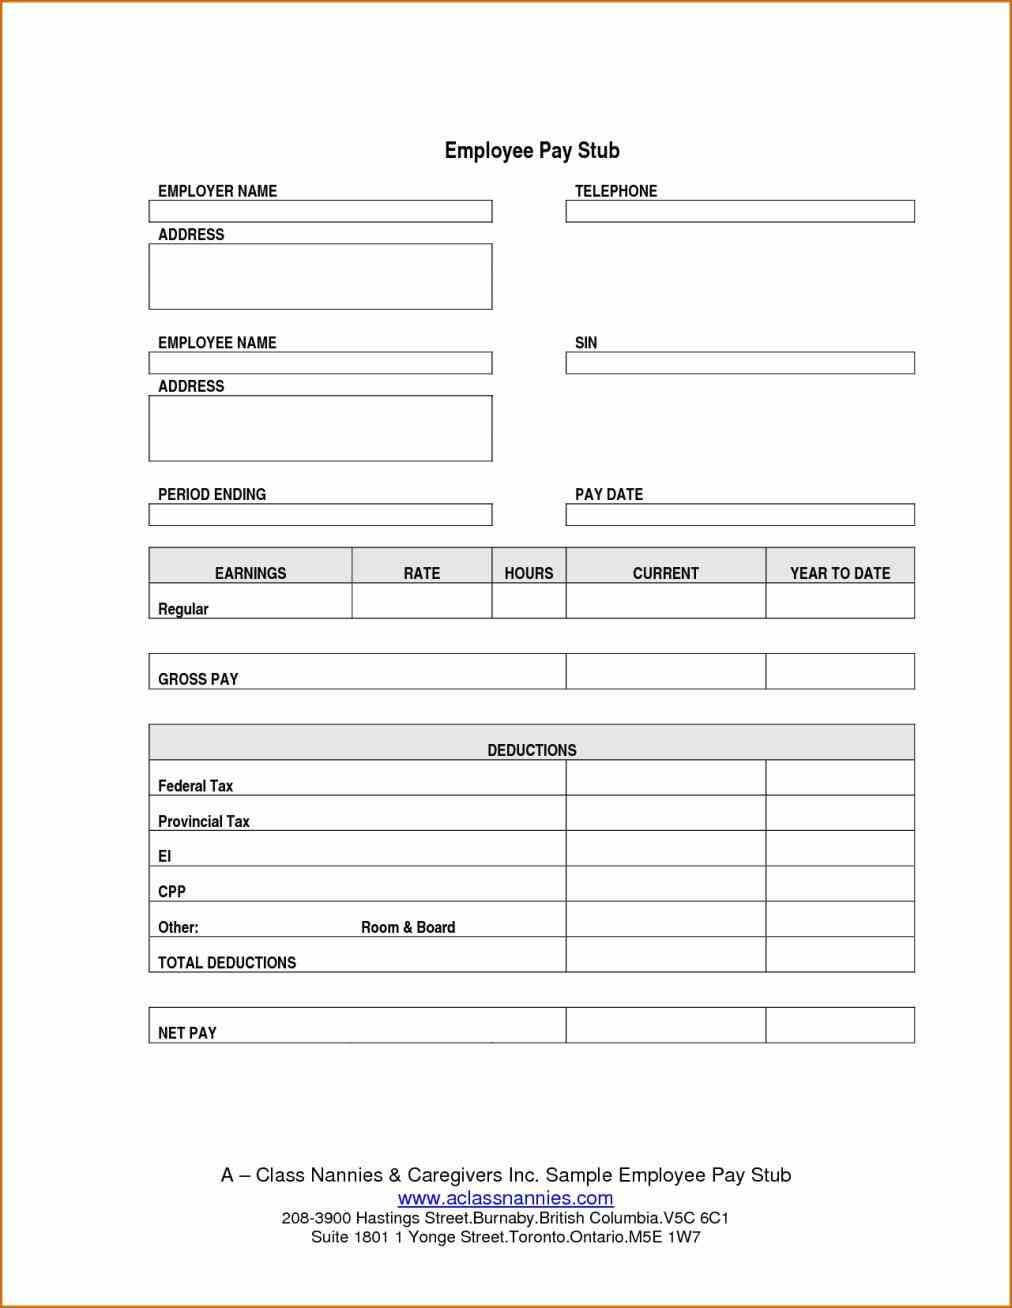 013 Blank Pay Stub Template Stirring Ideas Payroll Download For Blank Pay Stubs Template